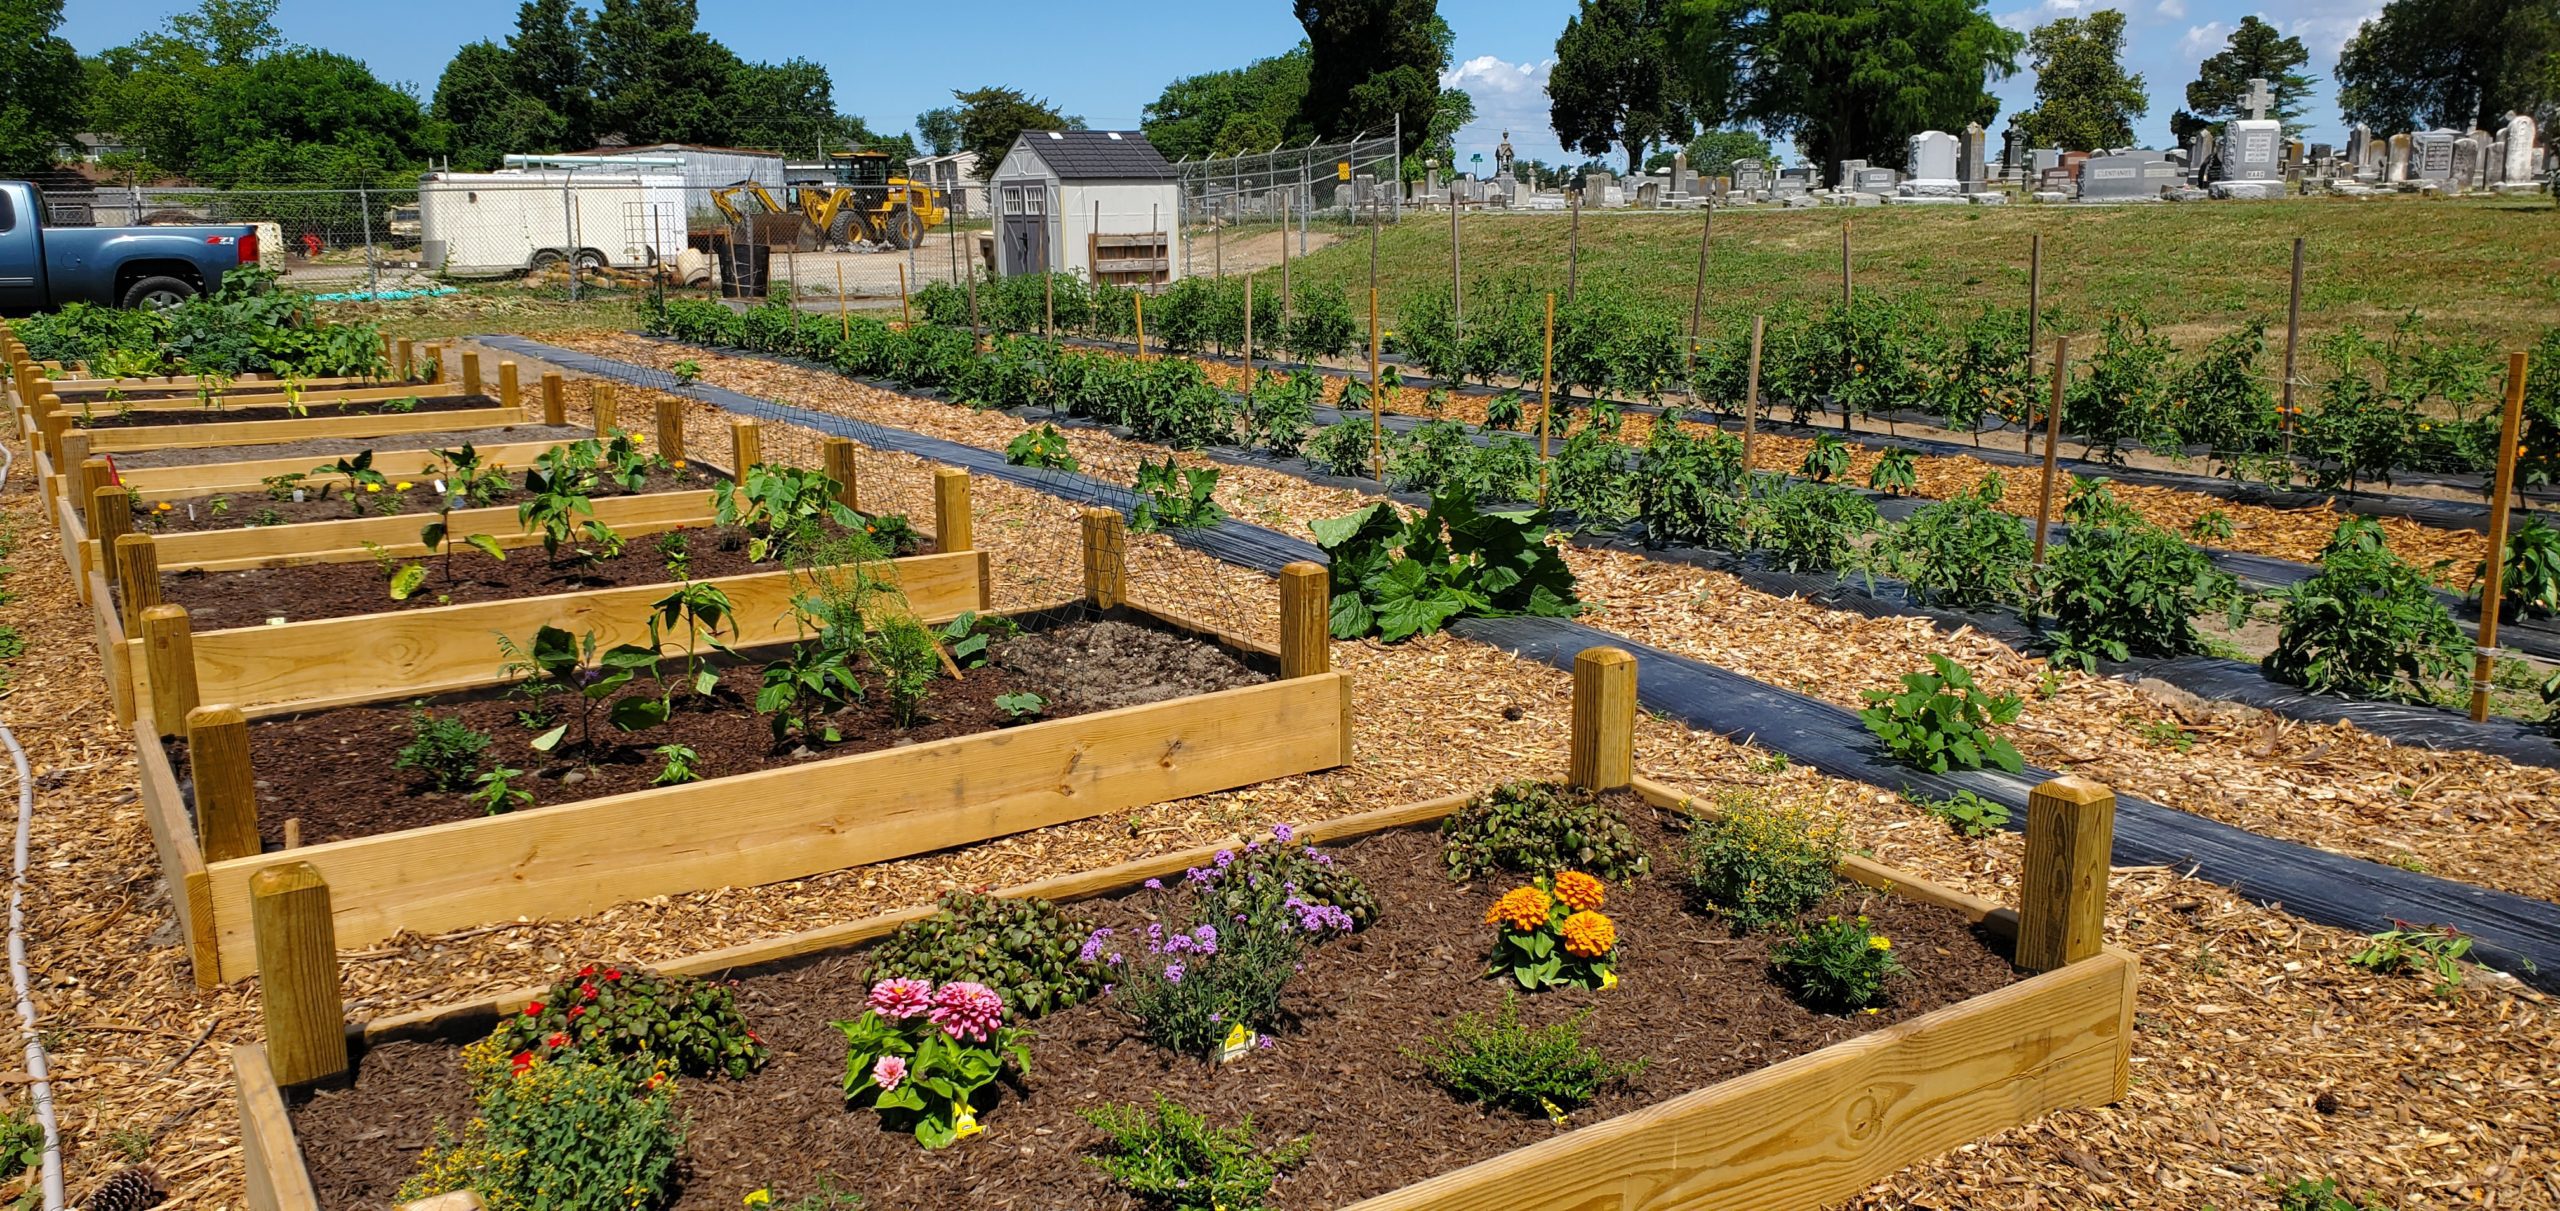 Featured image for “Community garden is entering its fifth season”